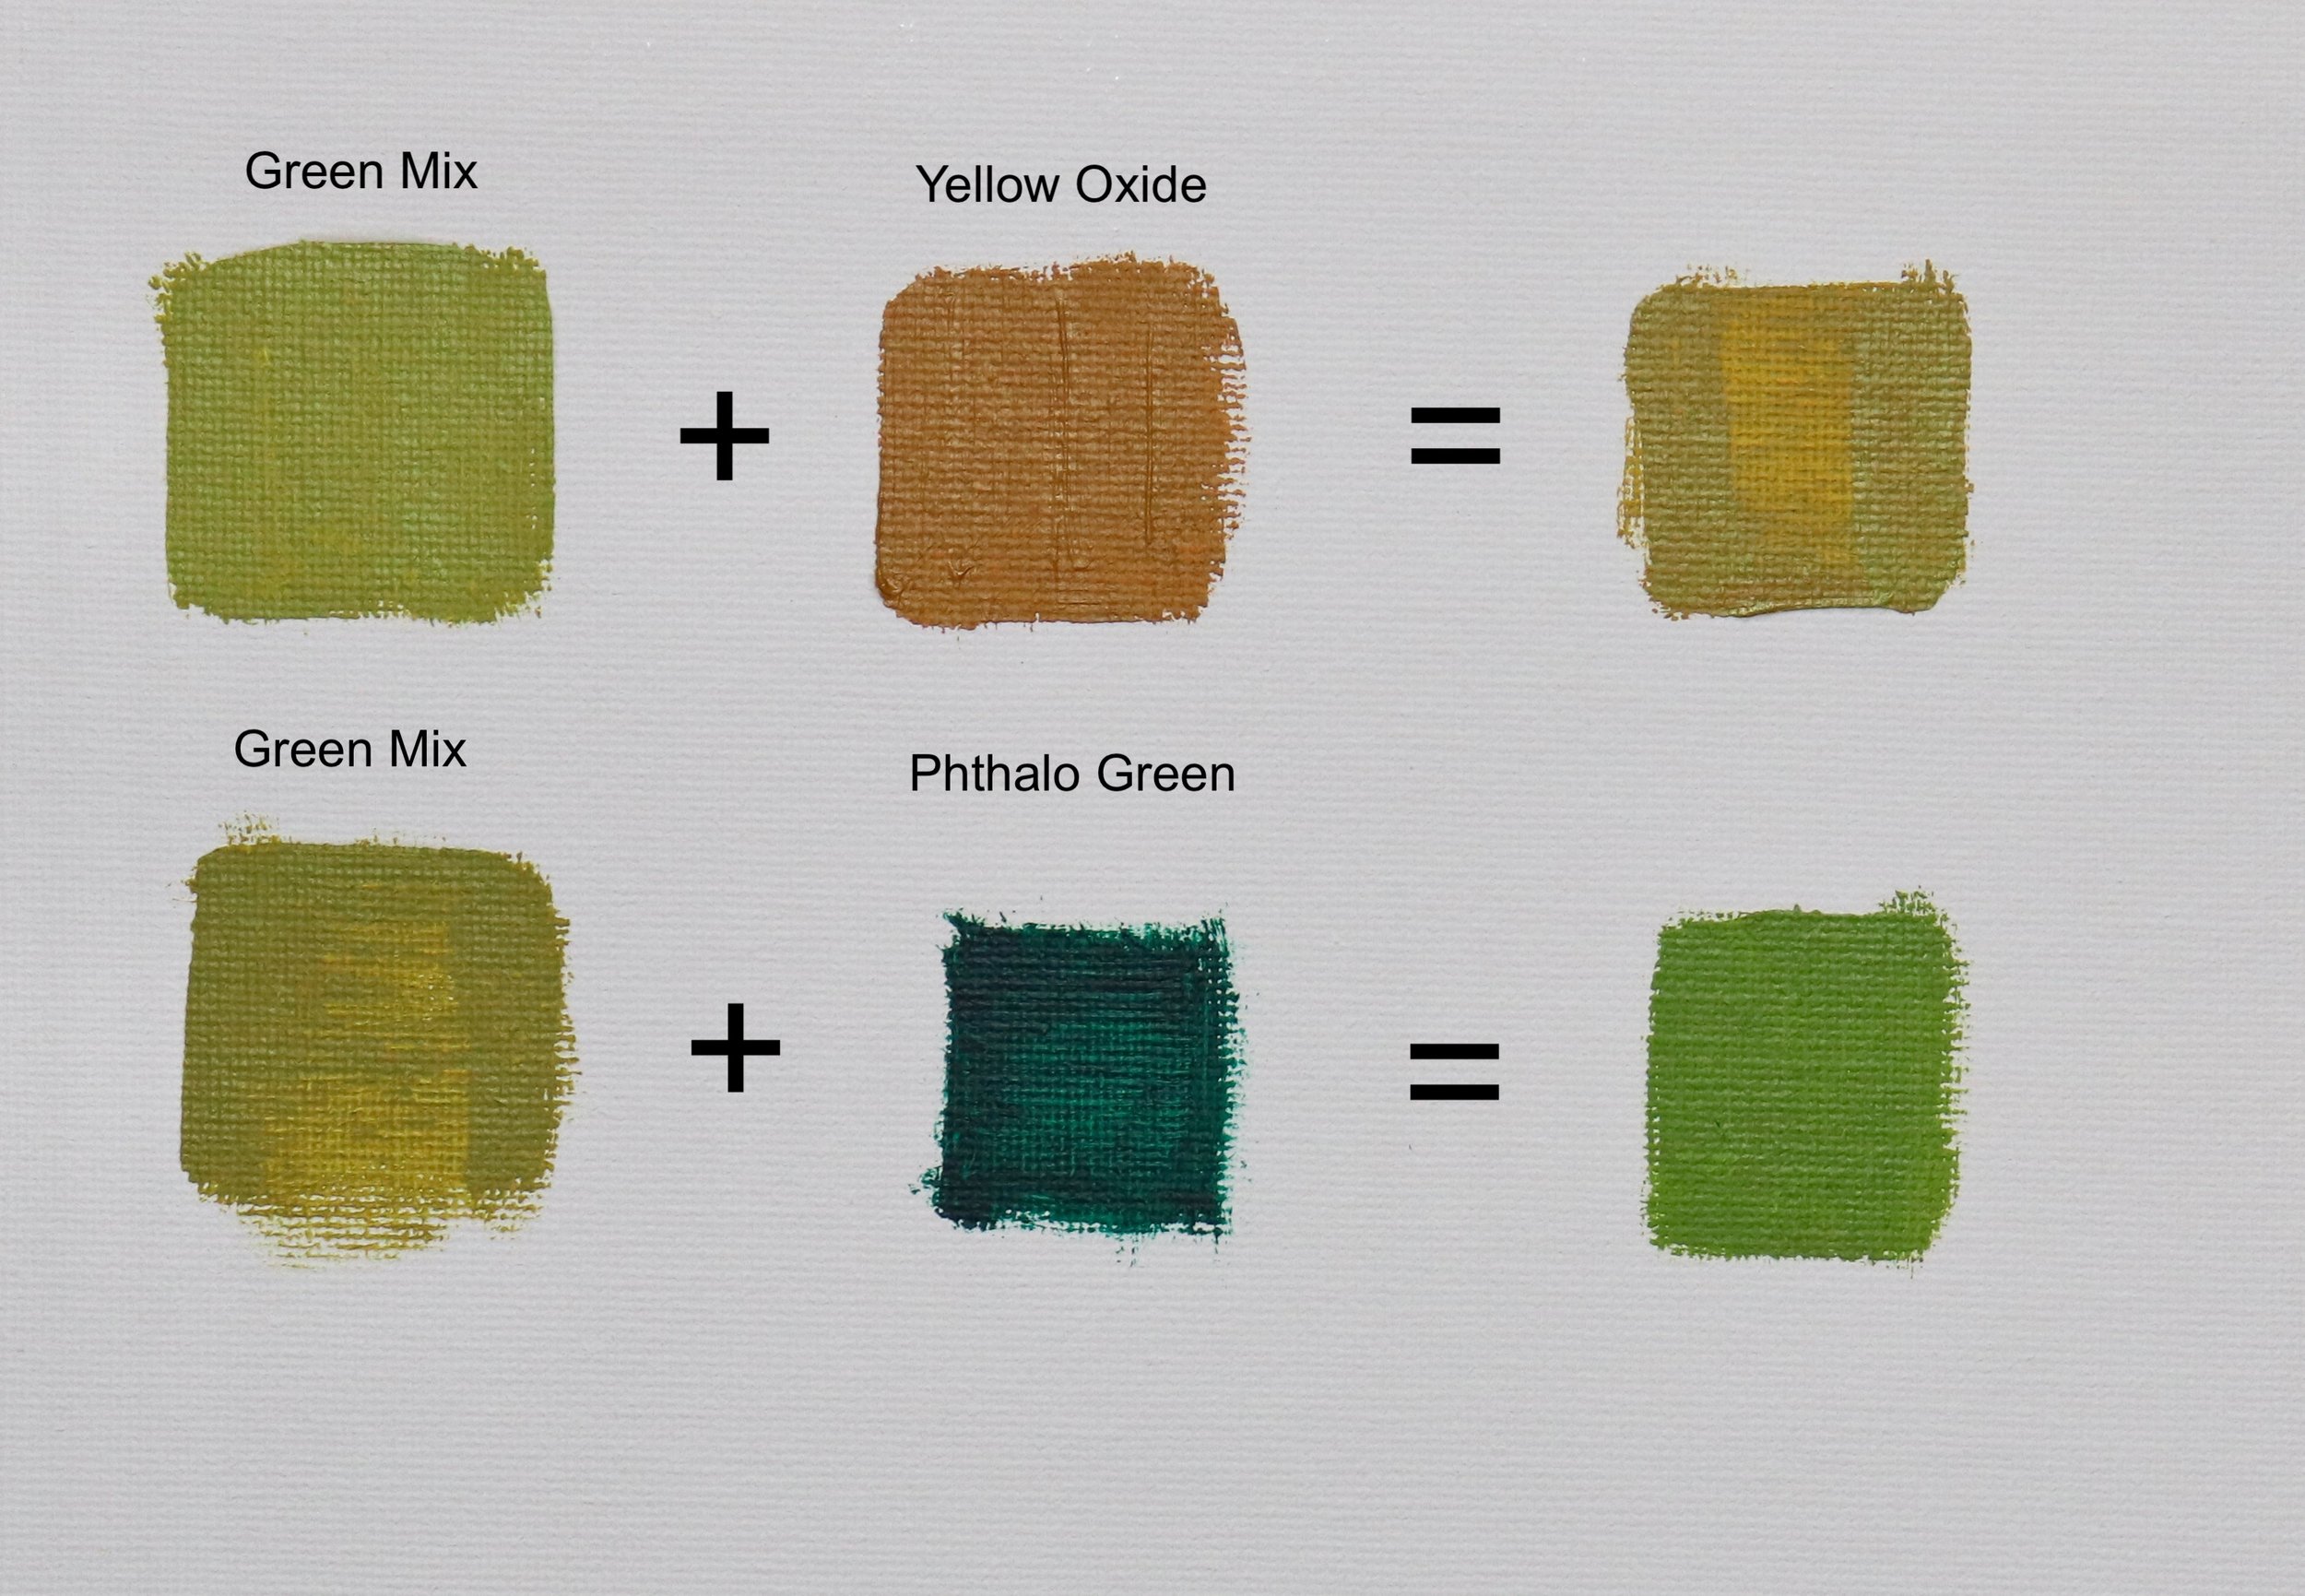 Here are two examples of adding additional colours to an existing grass green mix. Adding yellow oxide warms and softens the green. Adding phthalo green increases the saturation to make a rich green.